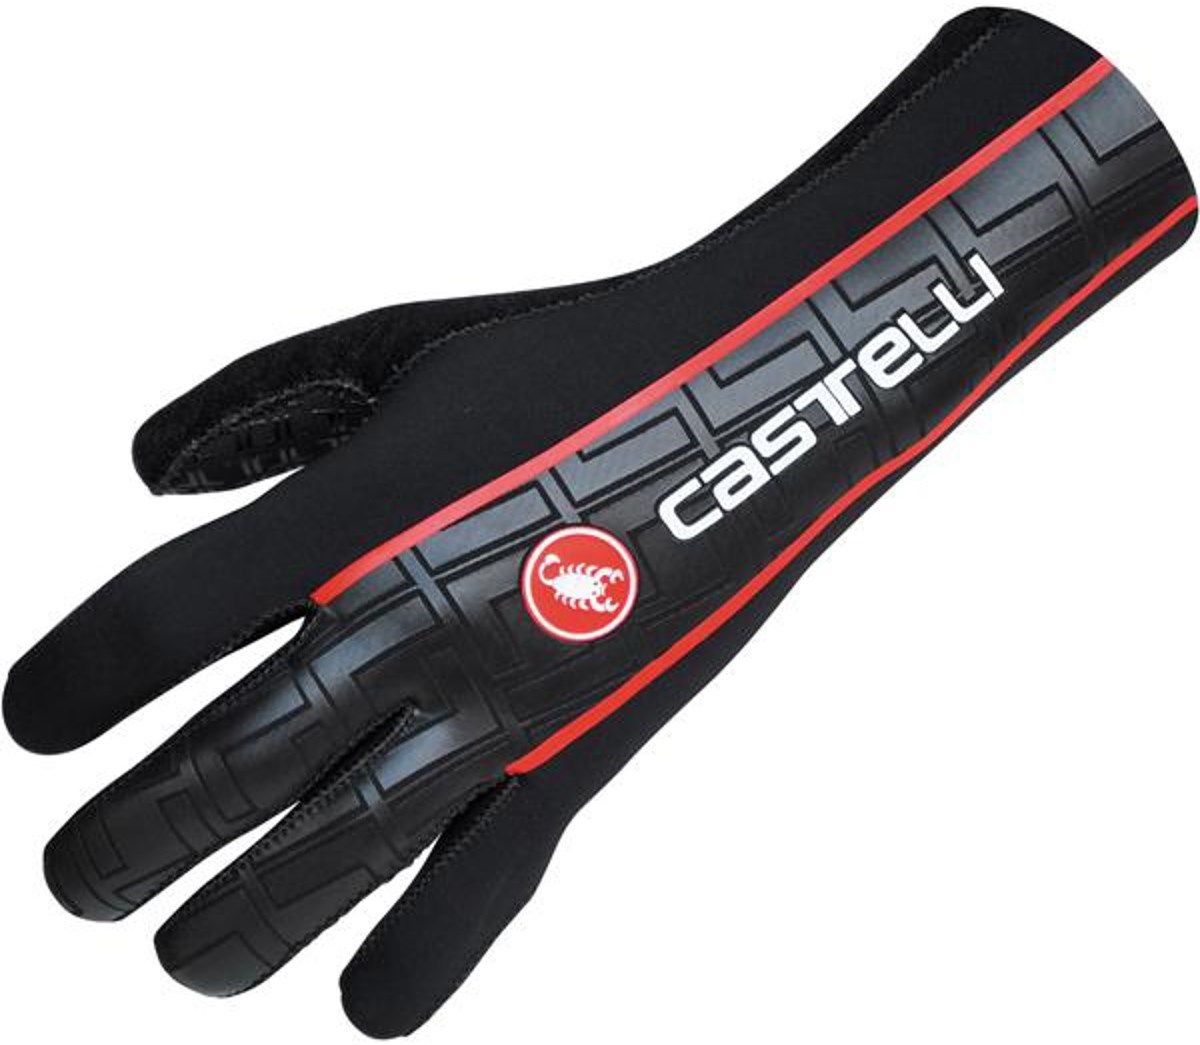 Castelli Diluvio Deluxe Long Finger Cycling Gloves product image